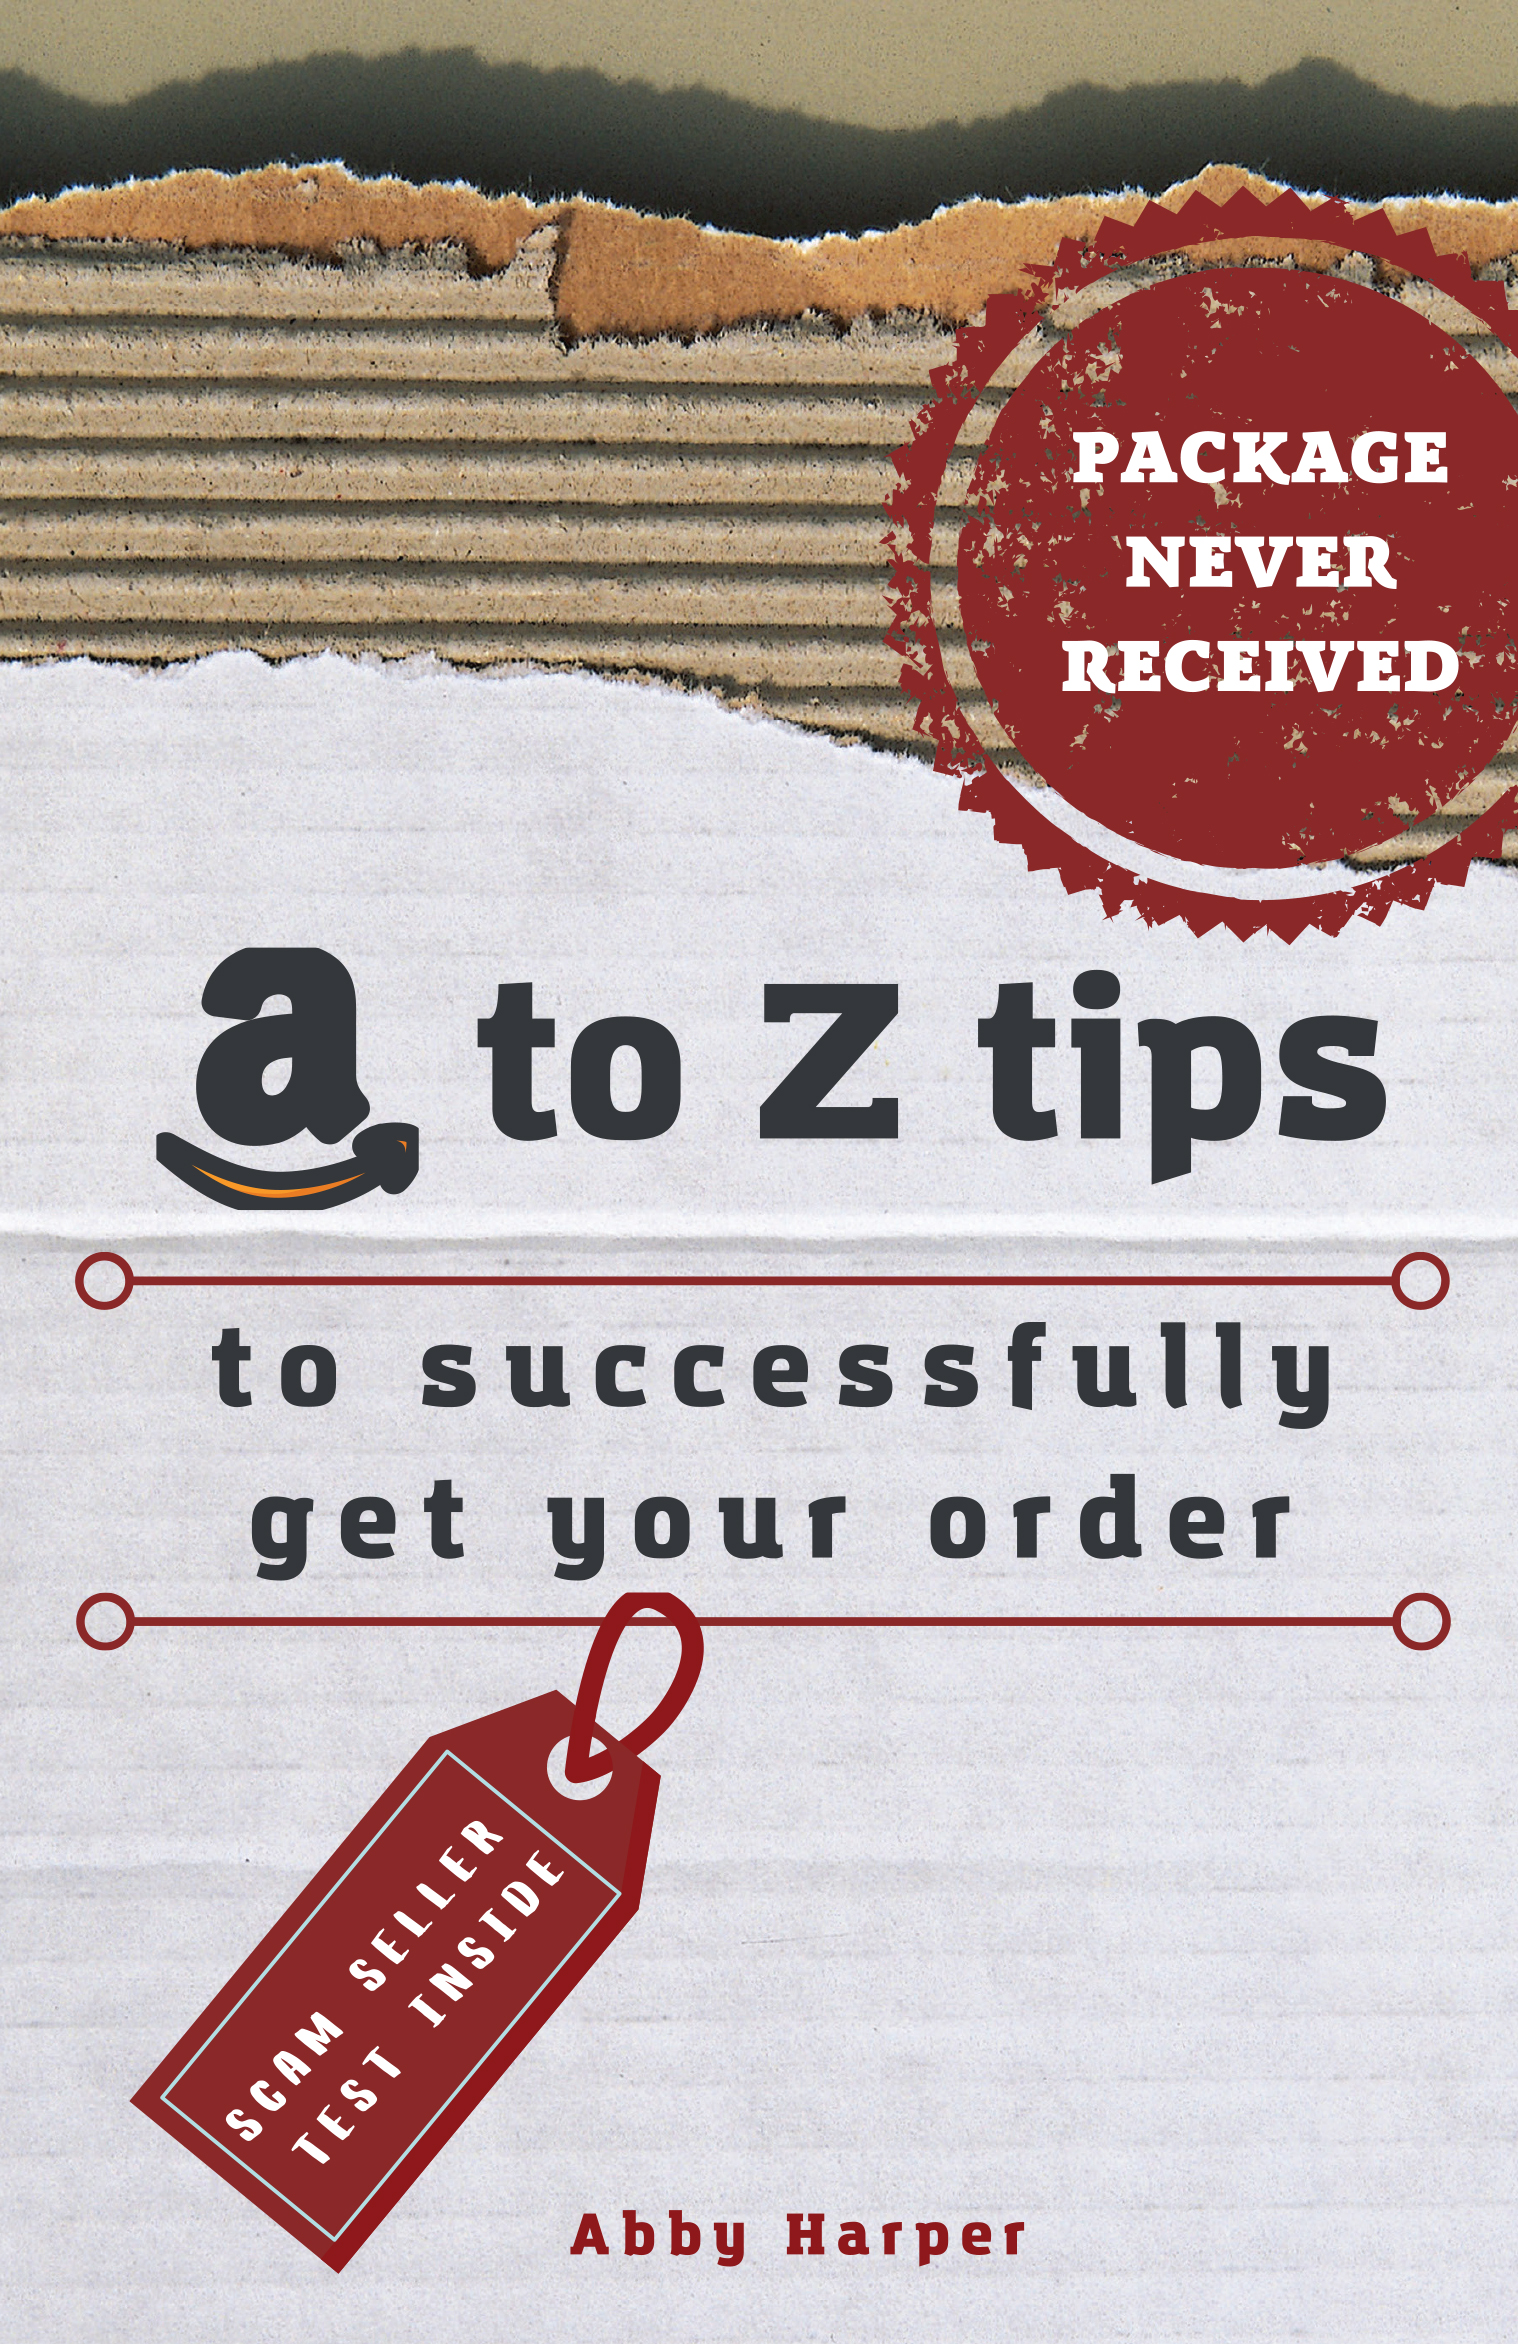 FREE: PACKAGE NEVER RECEIVED: A to Z tips to successfully get your order by Abby Harper